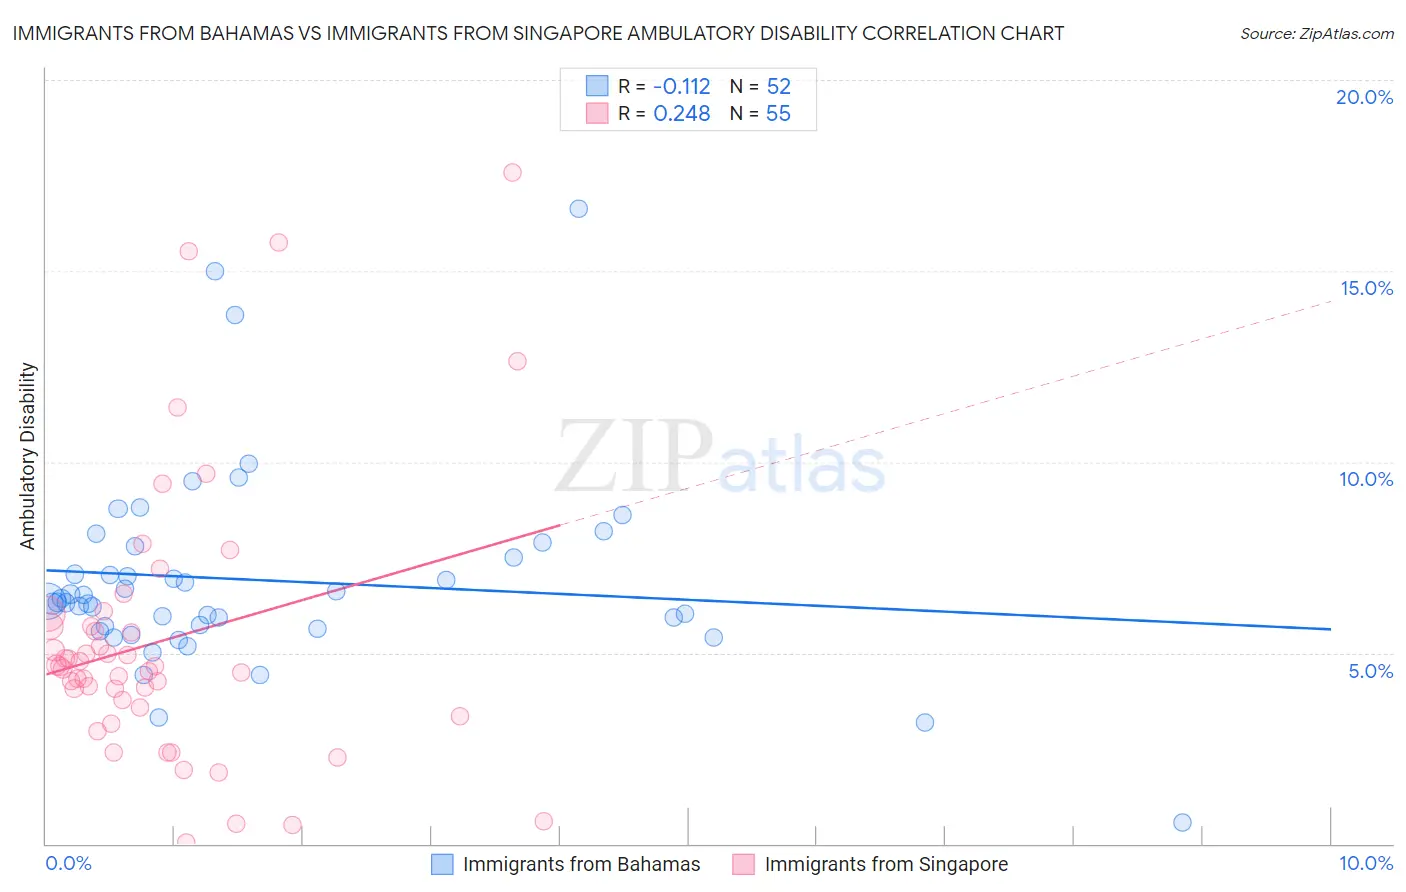 Immigrants from Bahamas vs Immigrants from Singapore Ambulatory Disability